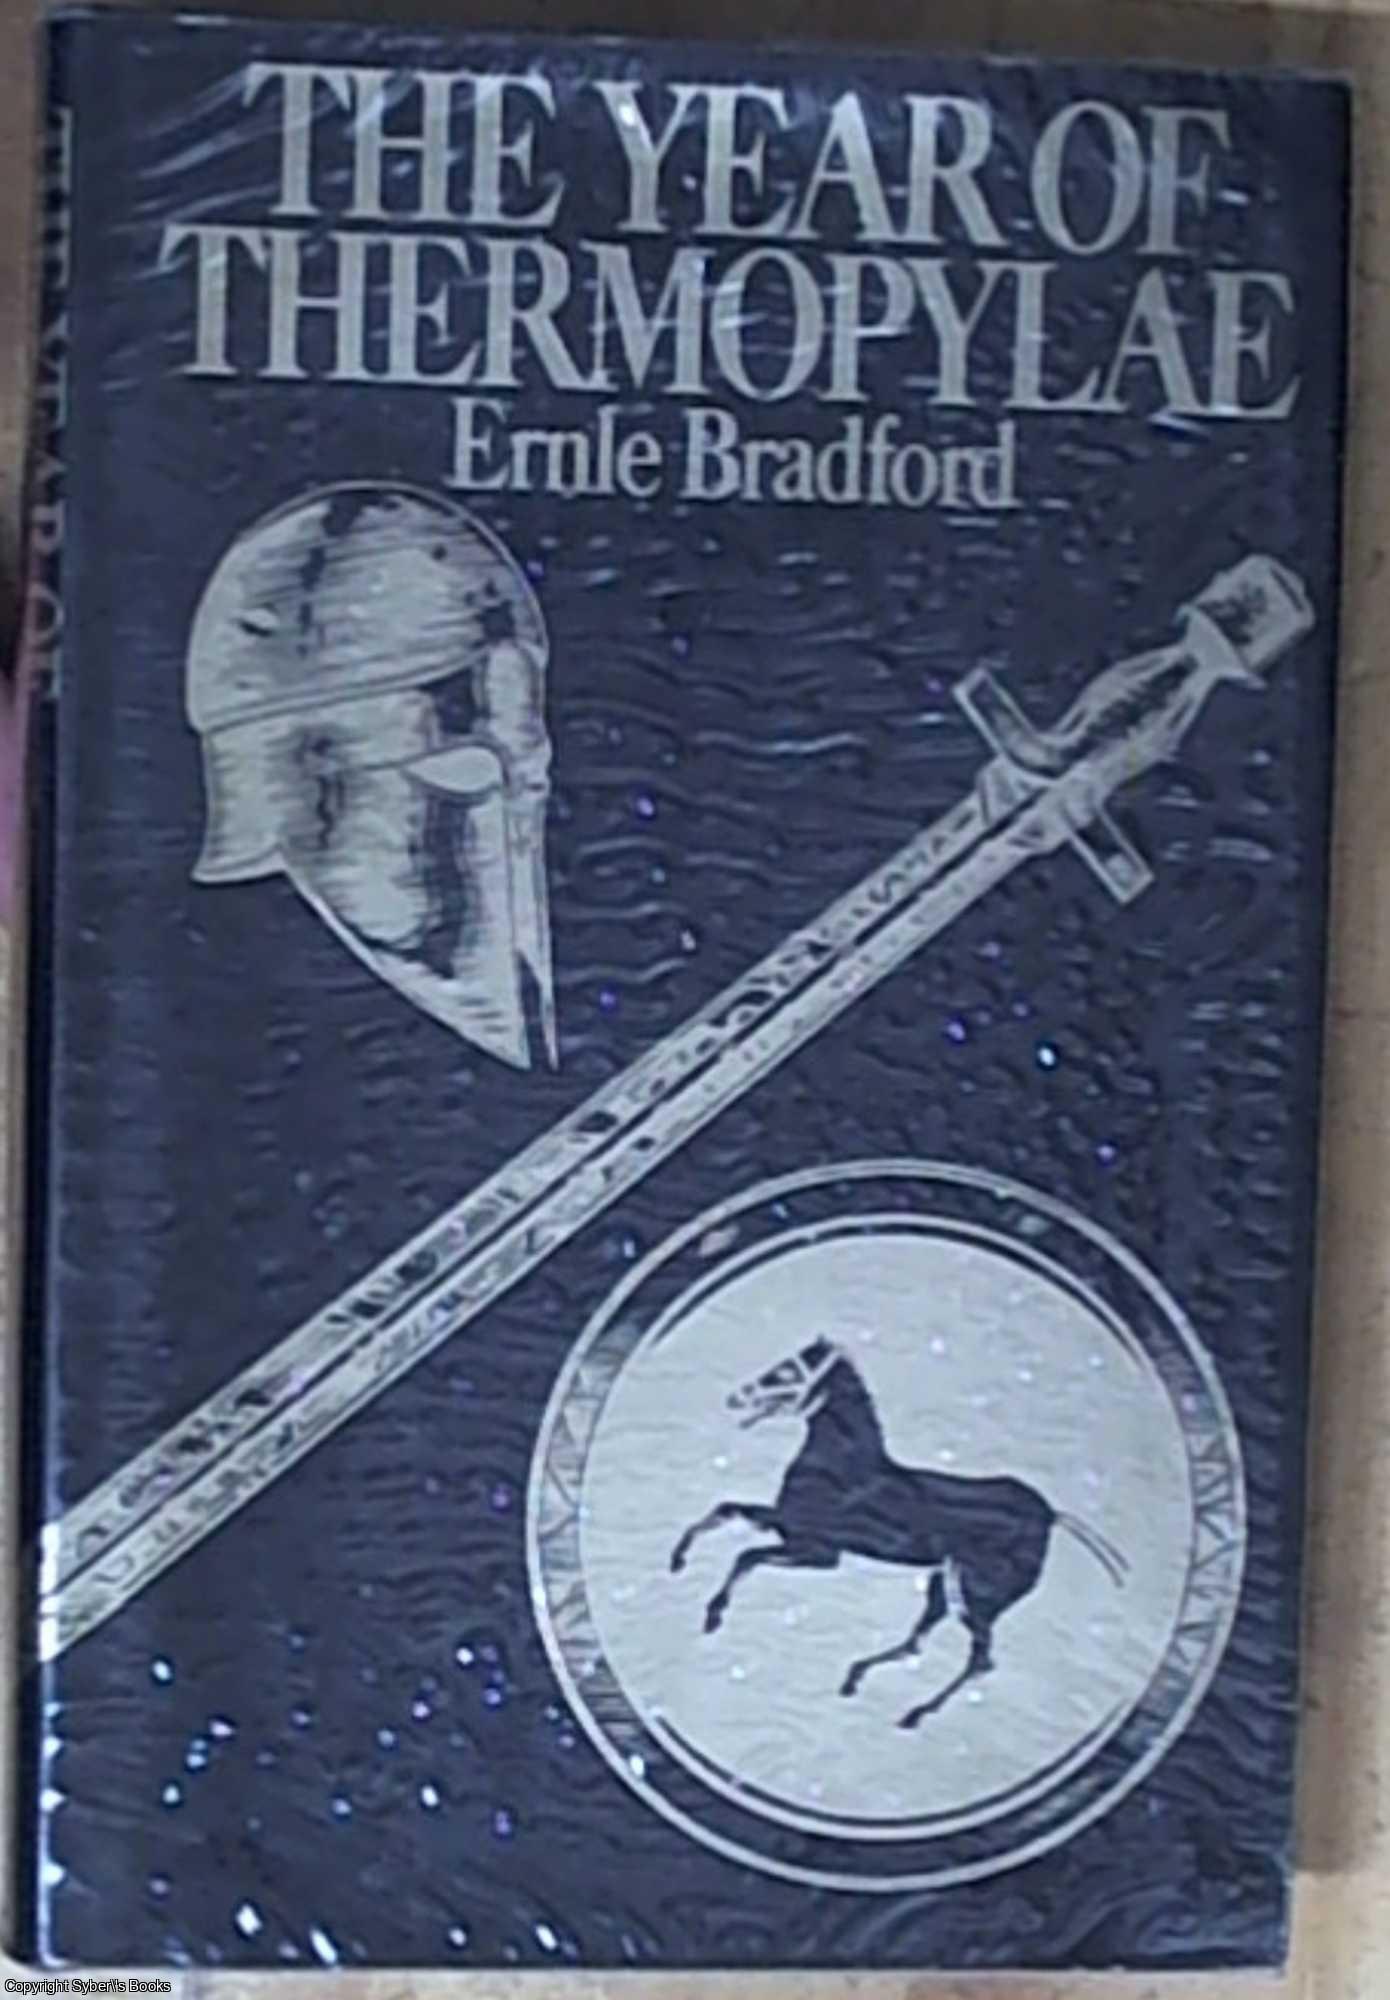 Bradford, Ernle - The Year of Thermopylae